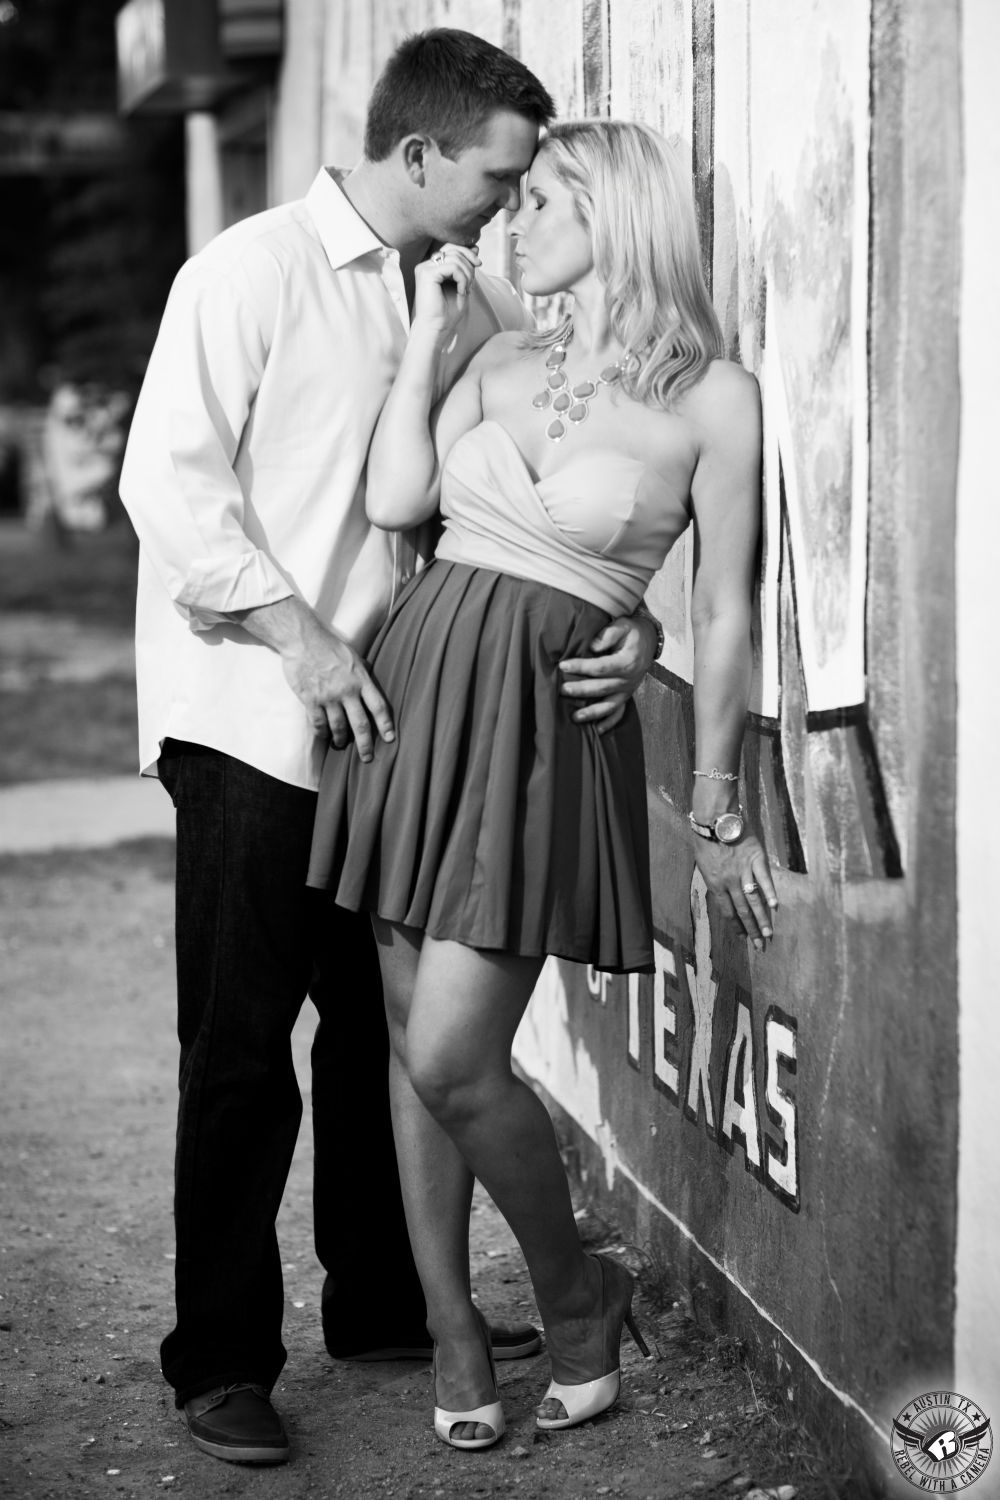 Sexy blond girl wearing an a-line off white and green dress and white high heels and beaded necklace nuzzles and gently touches the chin of a guy with dark hair wearing a white untucked button up dress shirt and dark jeans in front of the Greetings From Austin sign near SOCO in this impactful engagement portrait in South Austin.  